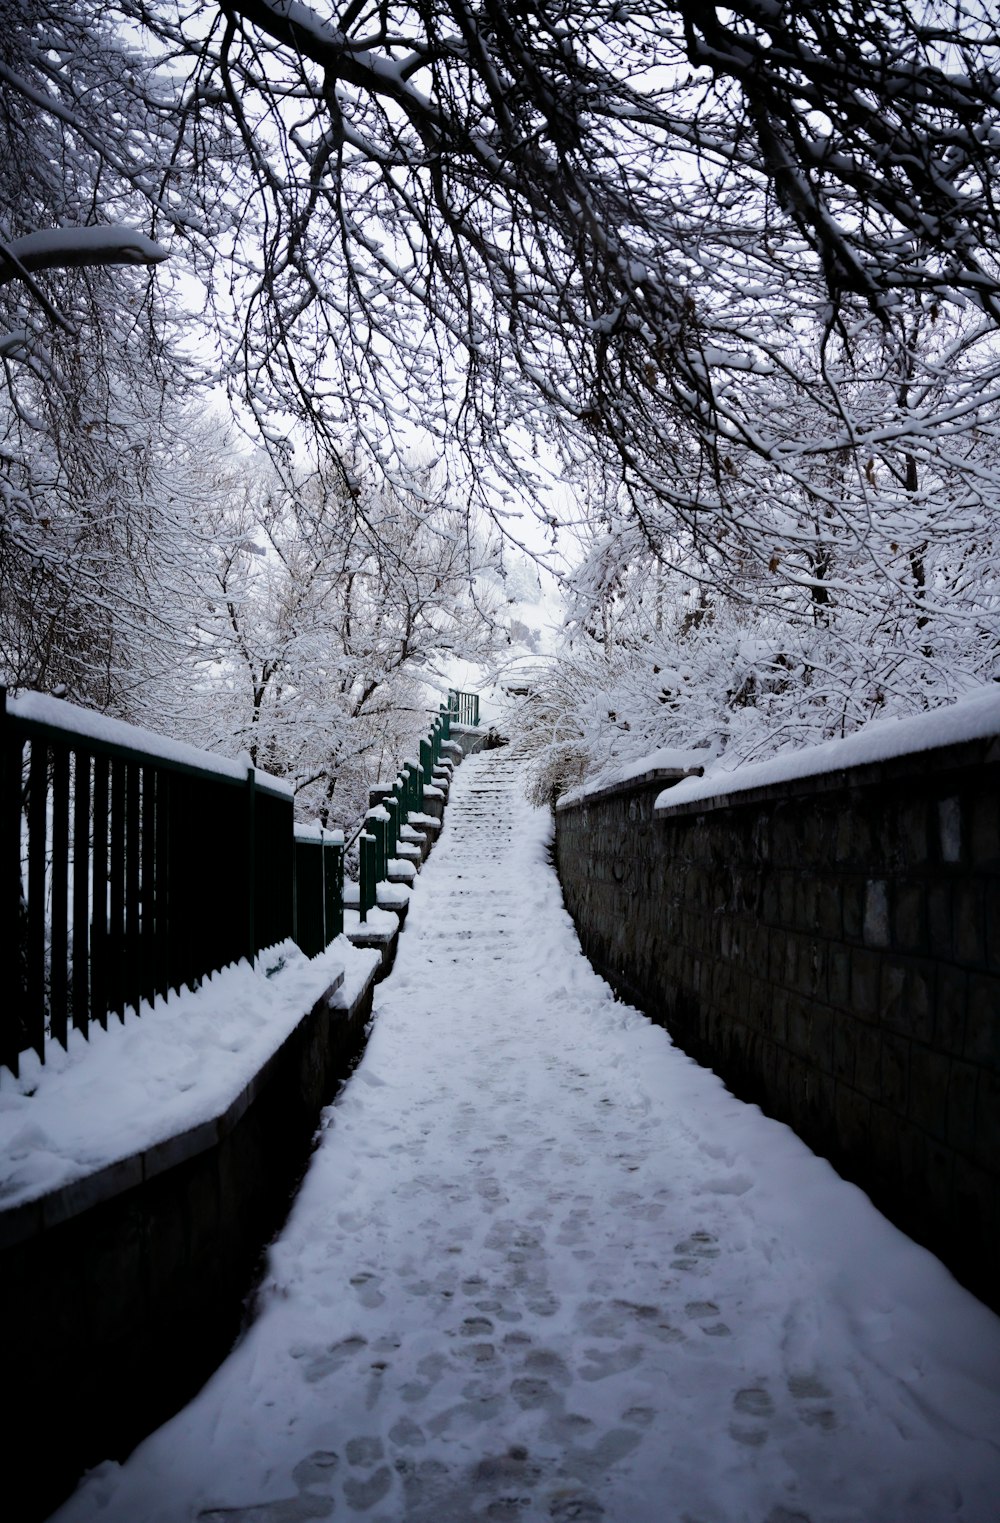 a snowy path with benches and trees on either side